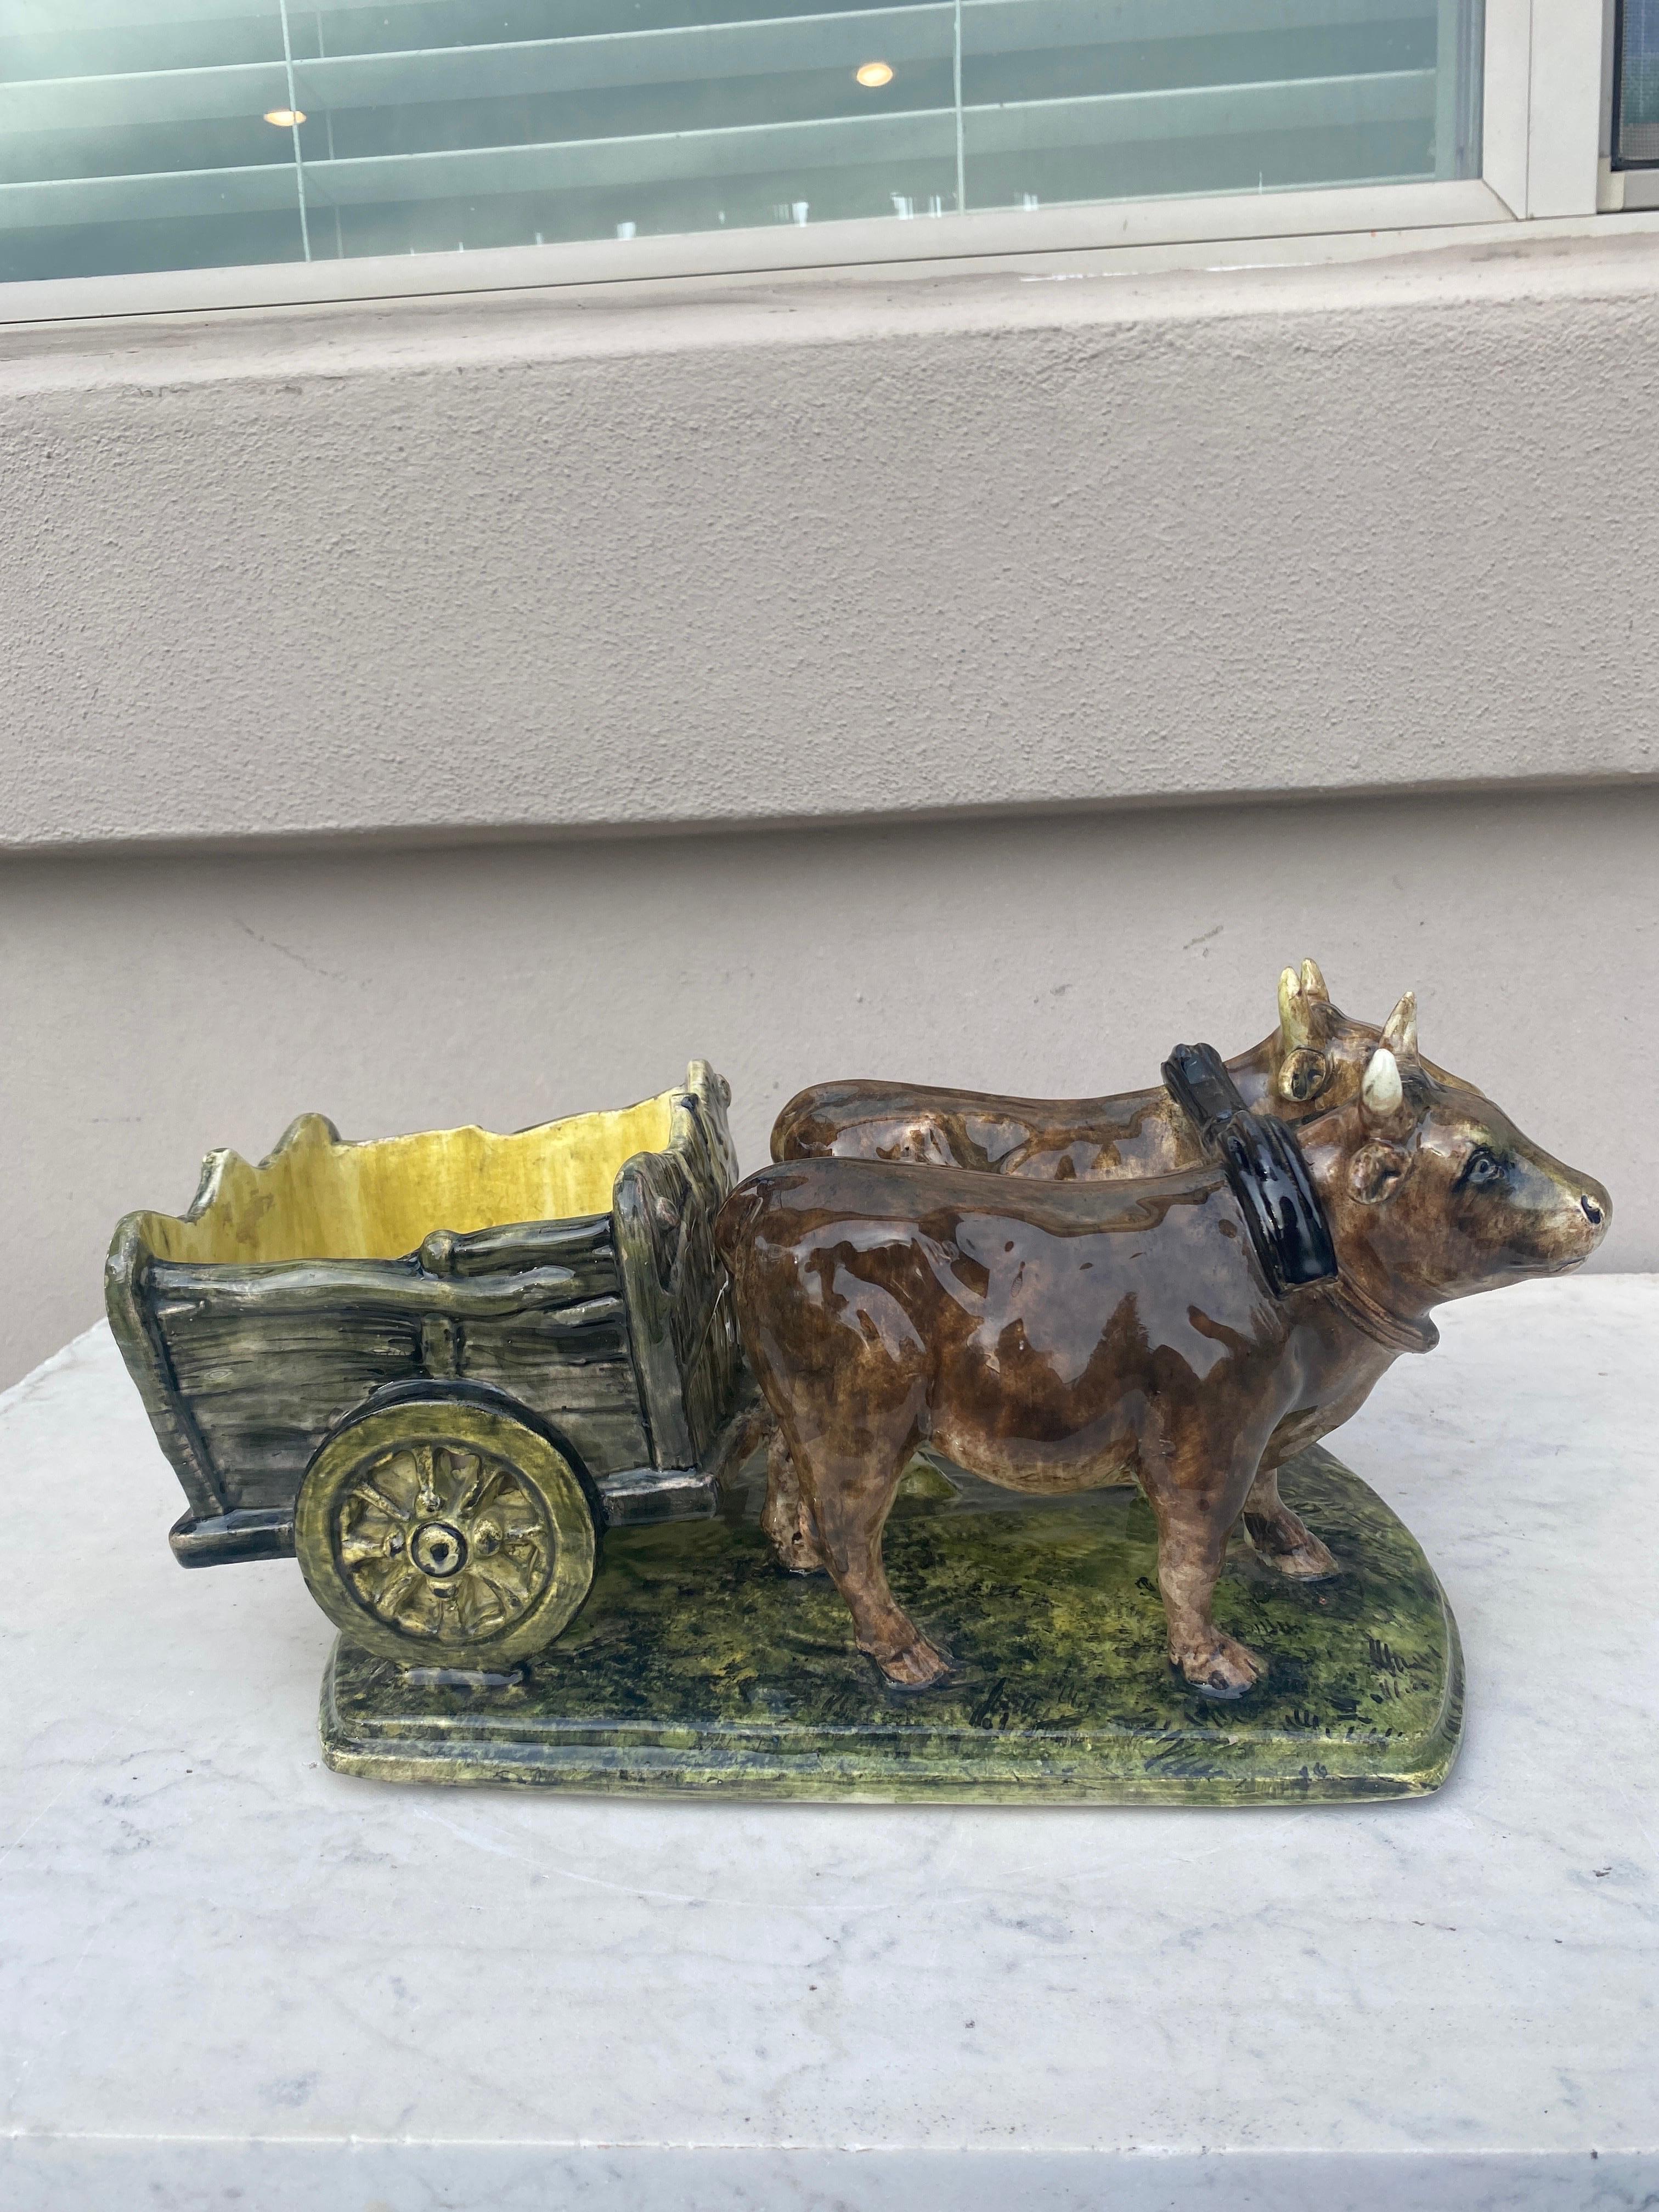 Antique Majolica oxen cart jardiniere circa 1900, signed Clement Massier Golfe-Juan.
Reference: Page 111 